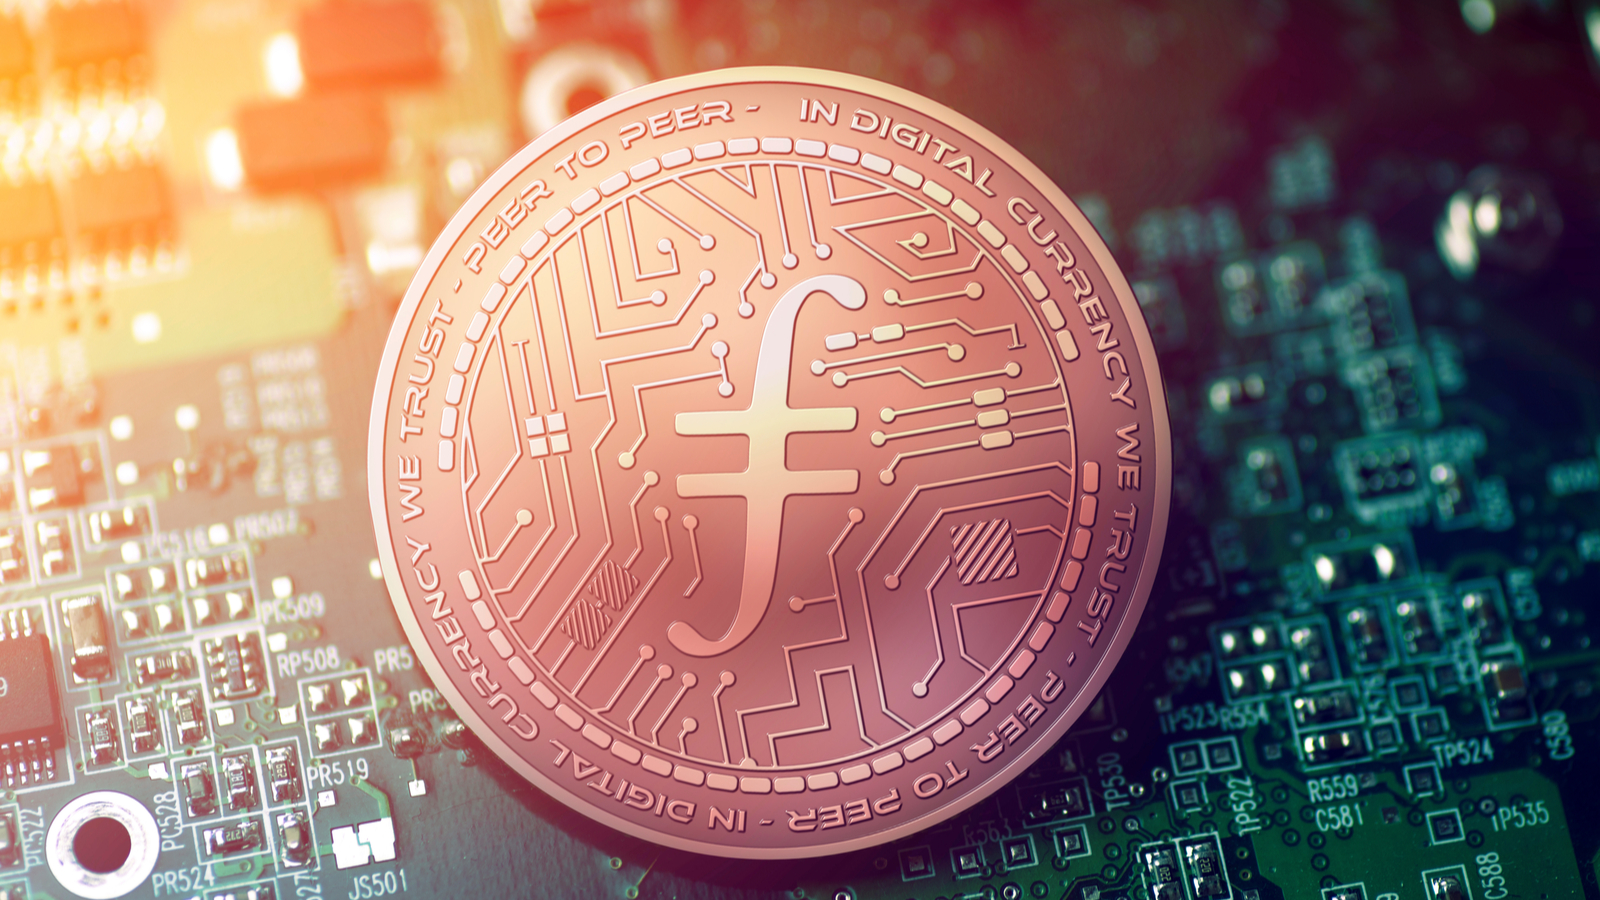 Filecoin (FIL) logo on a copper-colored coin that sits on top of a circuit board